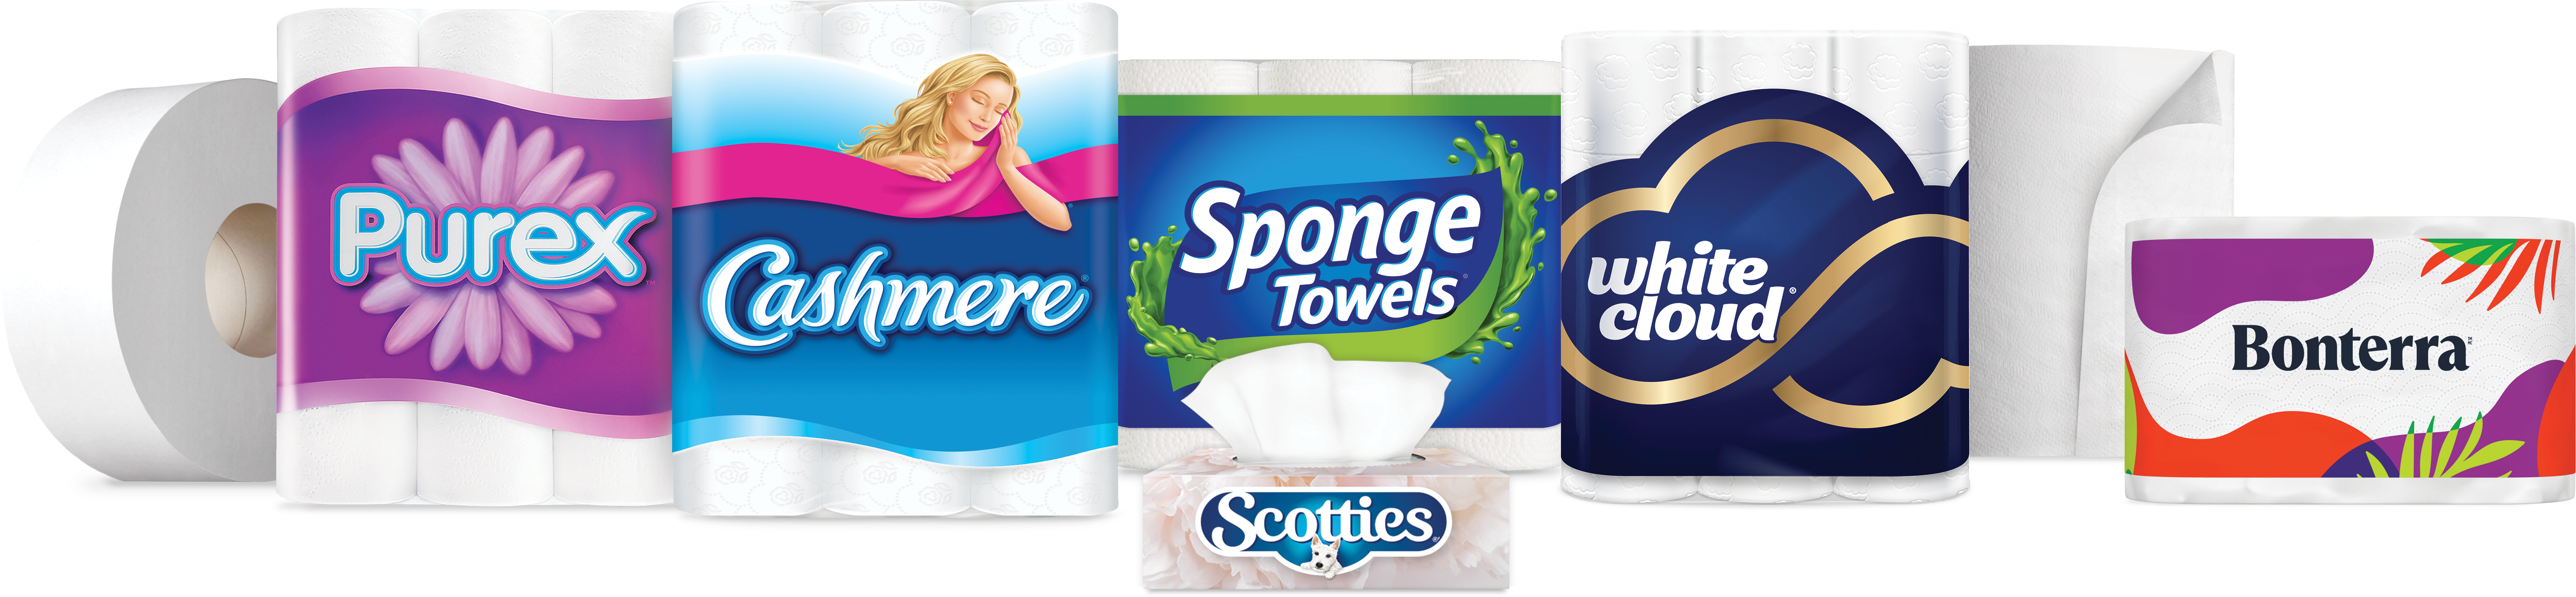 Tissue products - Kruger